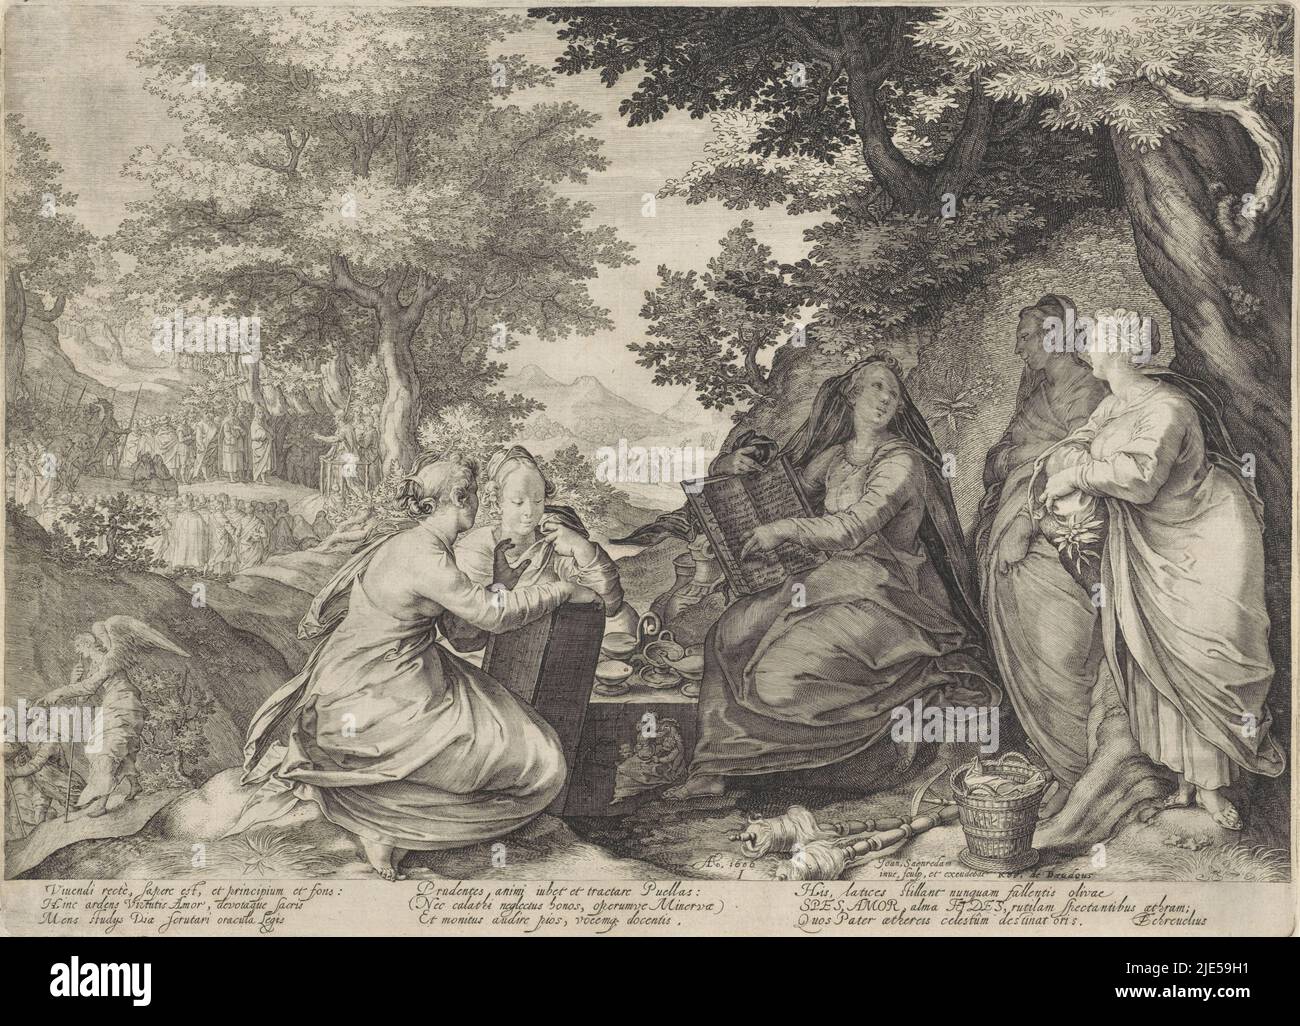 A forest landscape with the five wise virgins in the foreground. They sit around a table with the oil lamps and read from the Bible and the tablet with the ten commandments. Next to them jars of oil and objects of domestic custom. On the left an angel is sending two travellers away. In the background, John the Baptist preaches in a clearing in the forest. The print has a Latin caption, Five wise virgins in a landscape with the preaching of John the Baptist Likeness of the wise and foolish virgins (series title)., print maker: Jan Saenredam, (mentioned on object), Jan Saenredam, (mentioned on Stock Photo